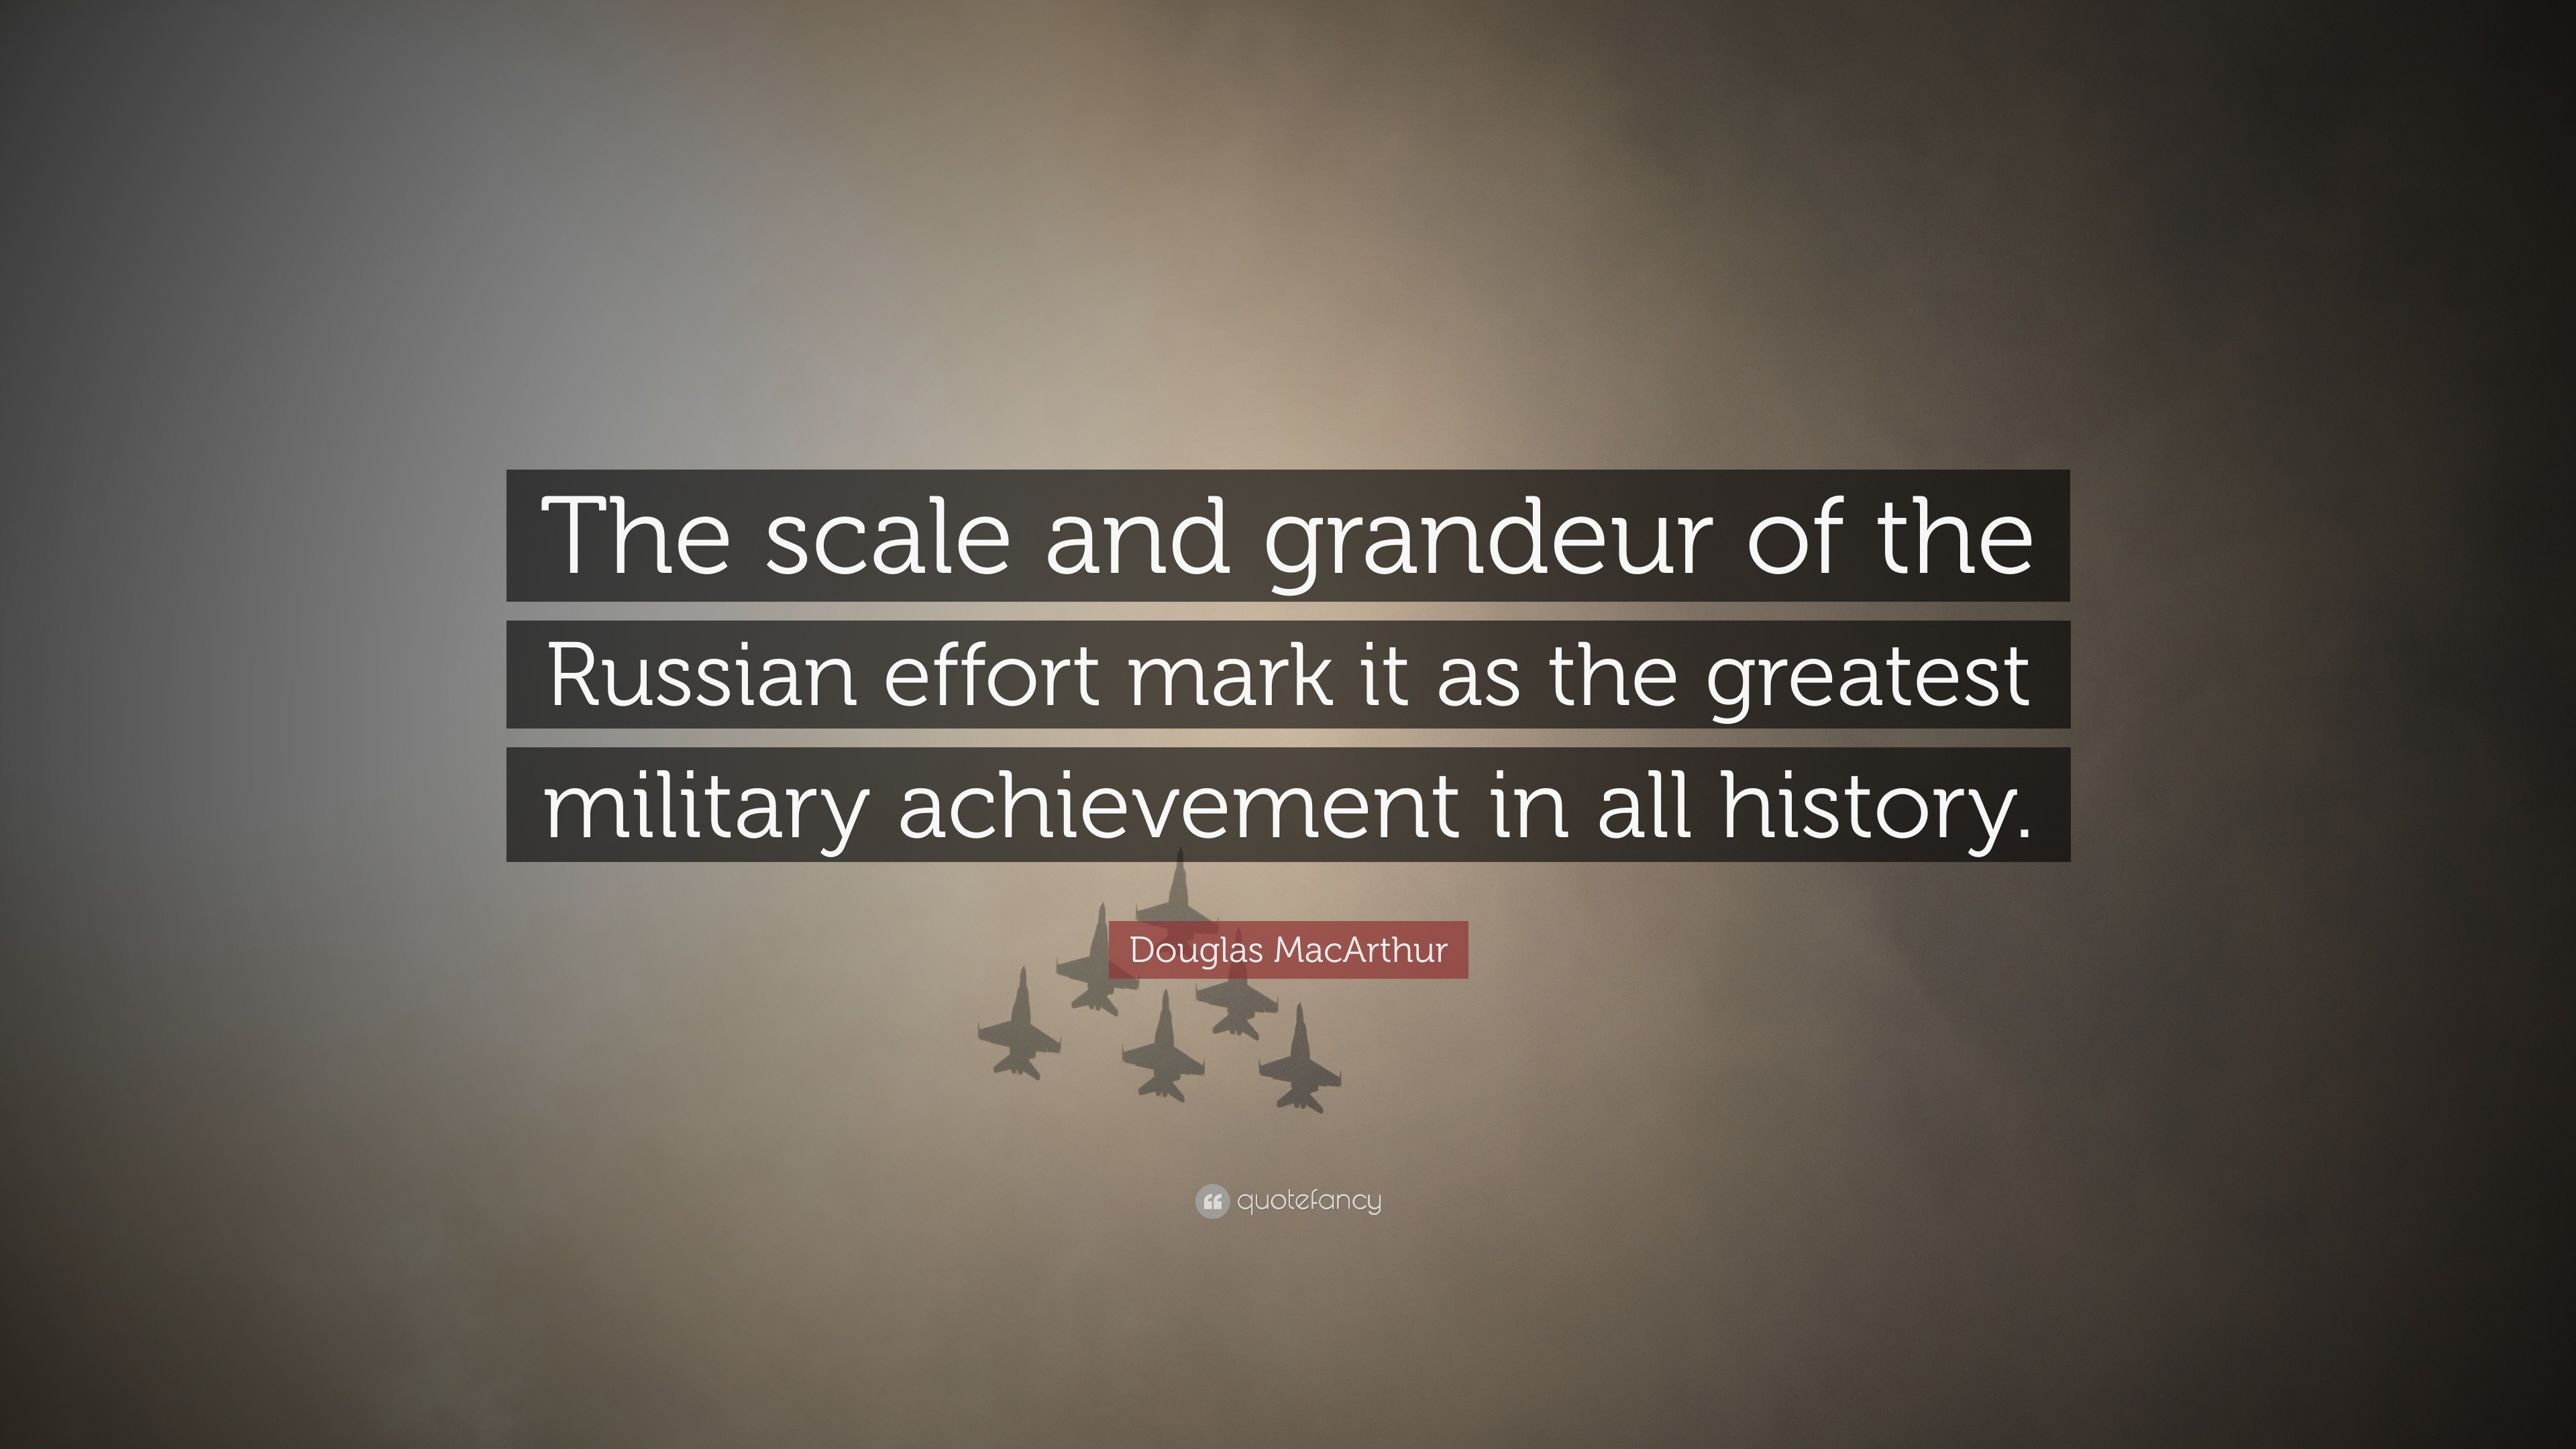 Douglas MacArthur Quote: “The scale and grandeur of the Russian effort mark  it as the greatest